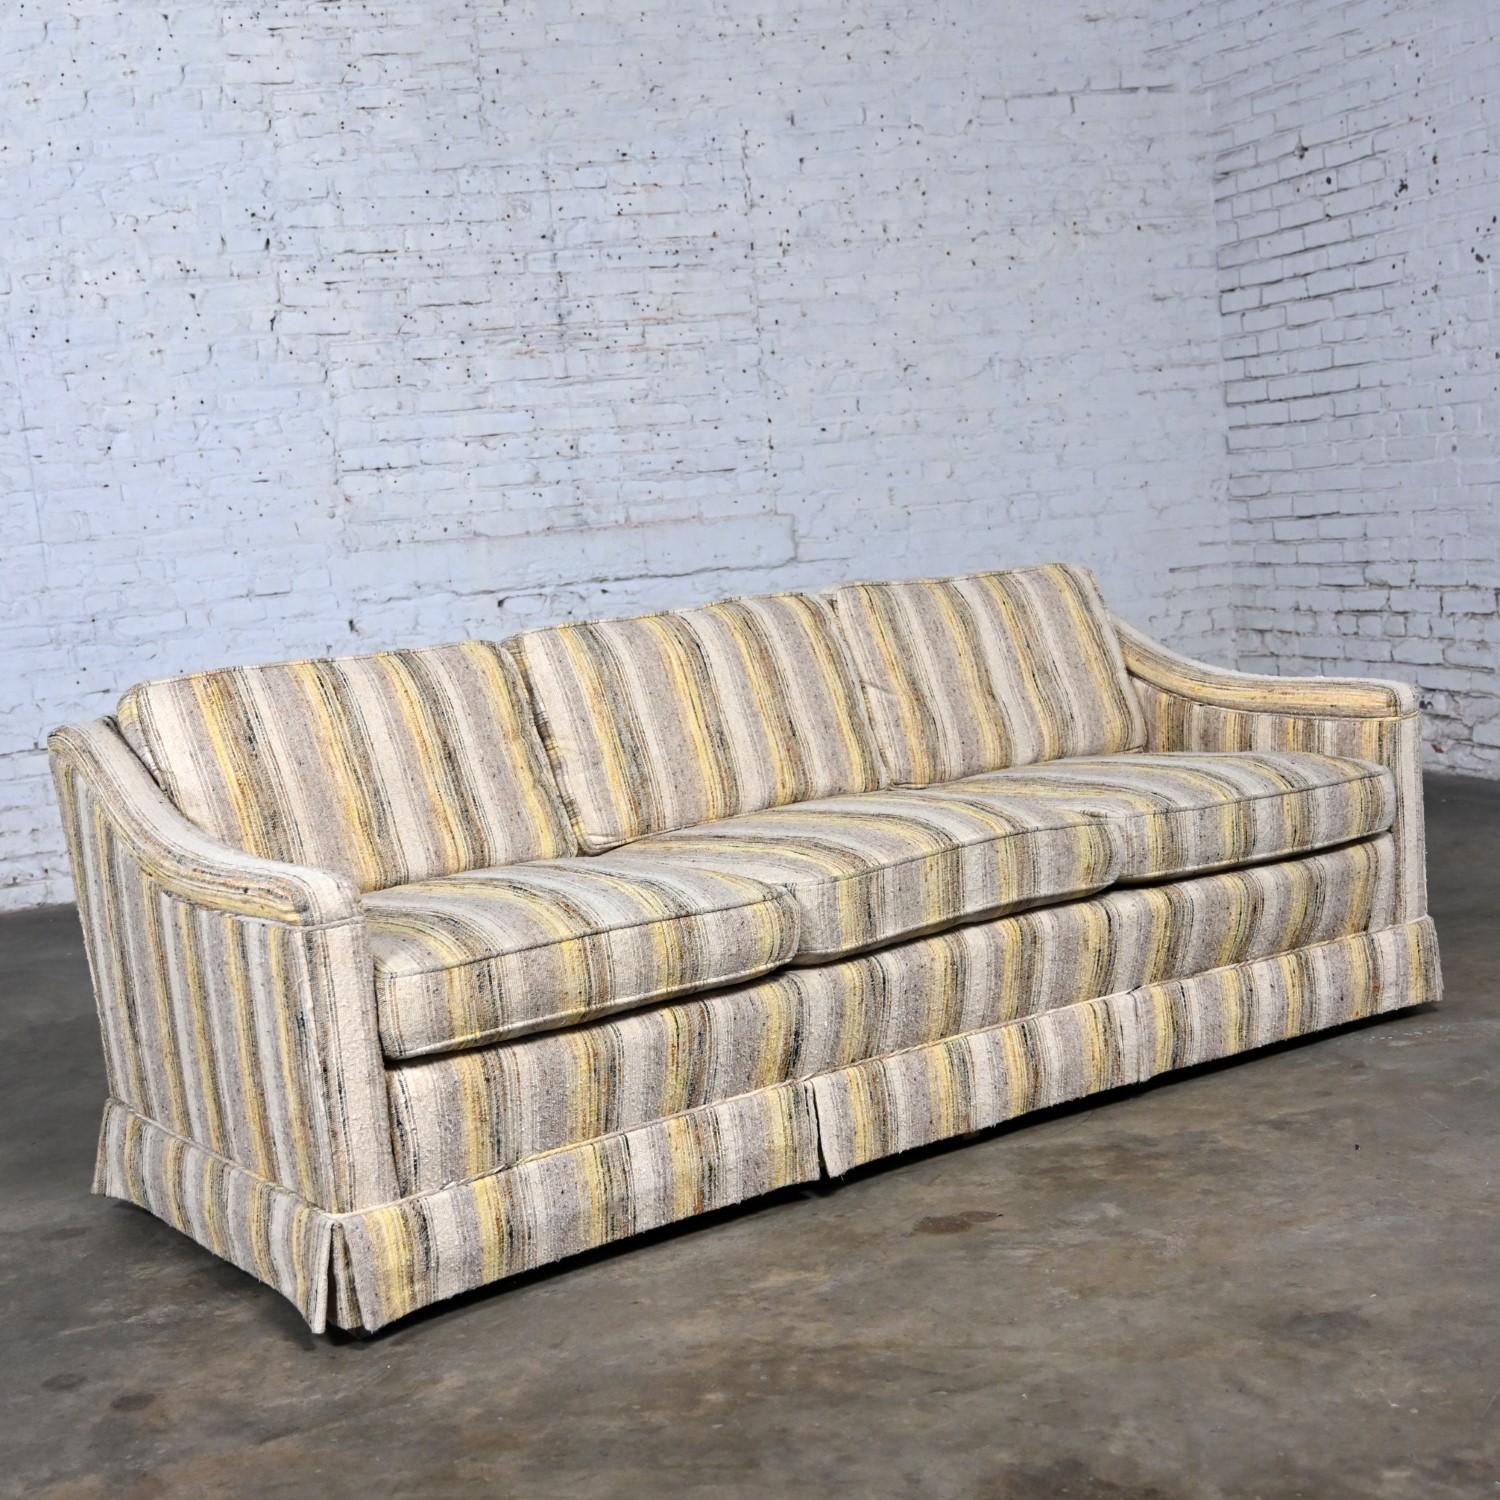 Marvelous Mid-20th Century Mid-Century Modern Henredon Modified Lawson style sofa with original yellow & beige striped fabric, 3 loose seat cushions with Poly wrapped feather down inner springs, 3 feather down loose back cushions, arm covers, and